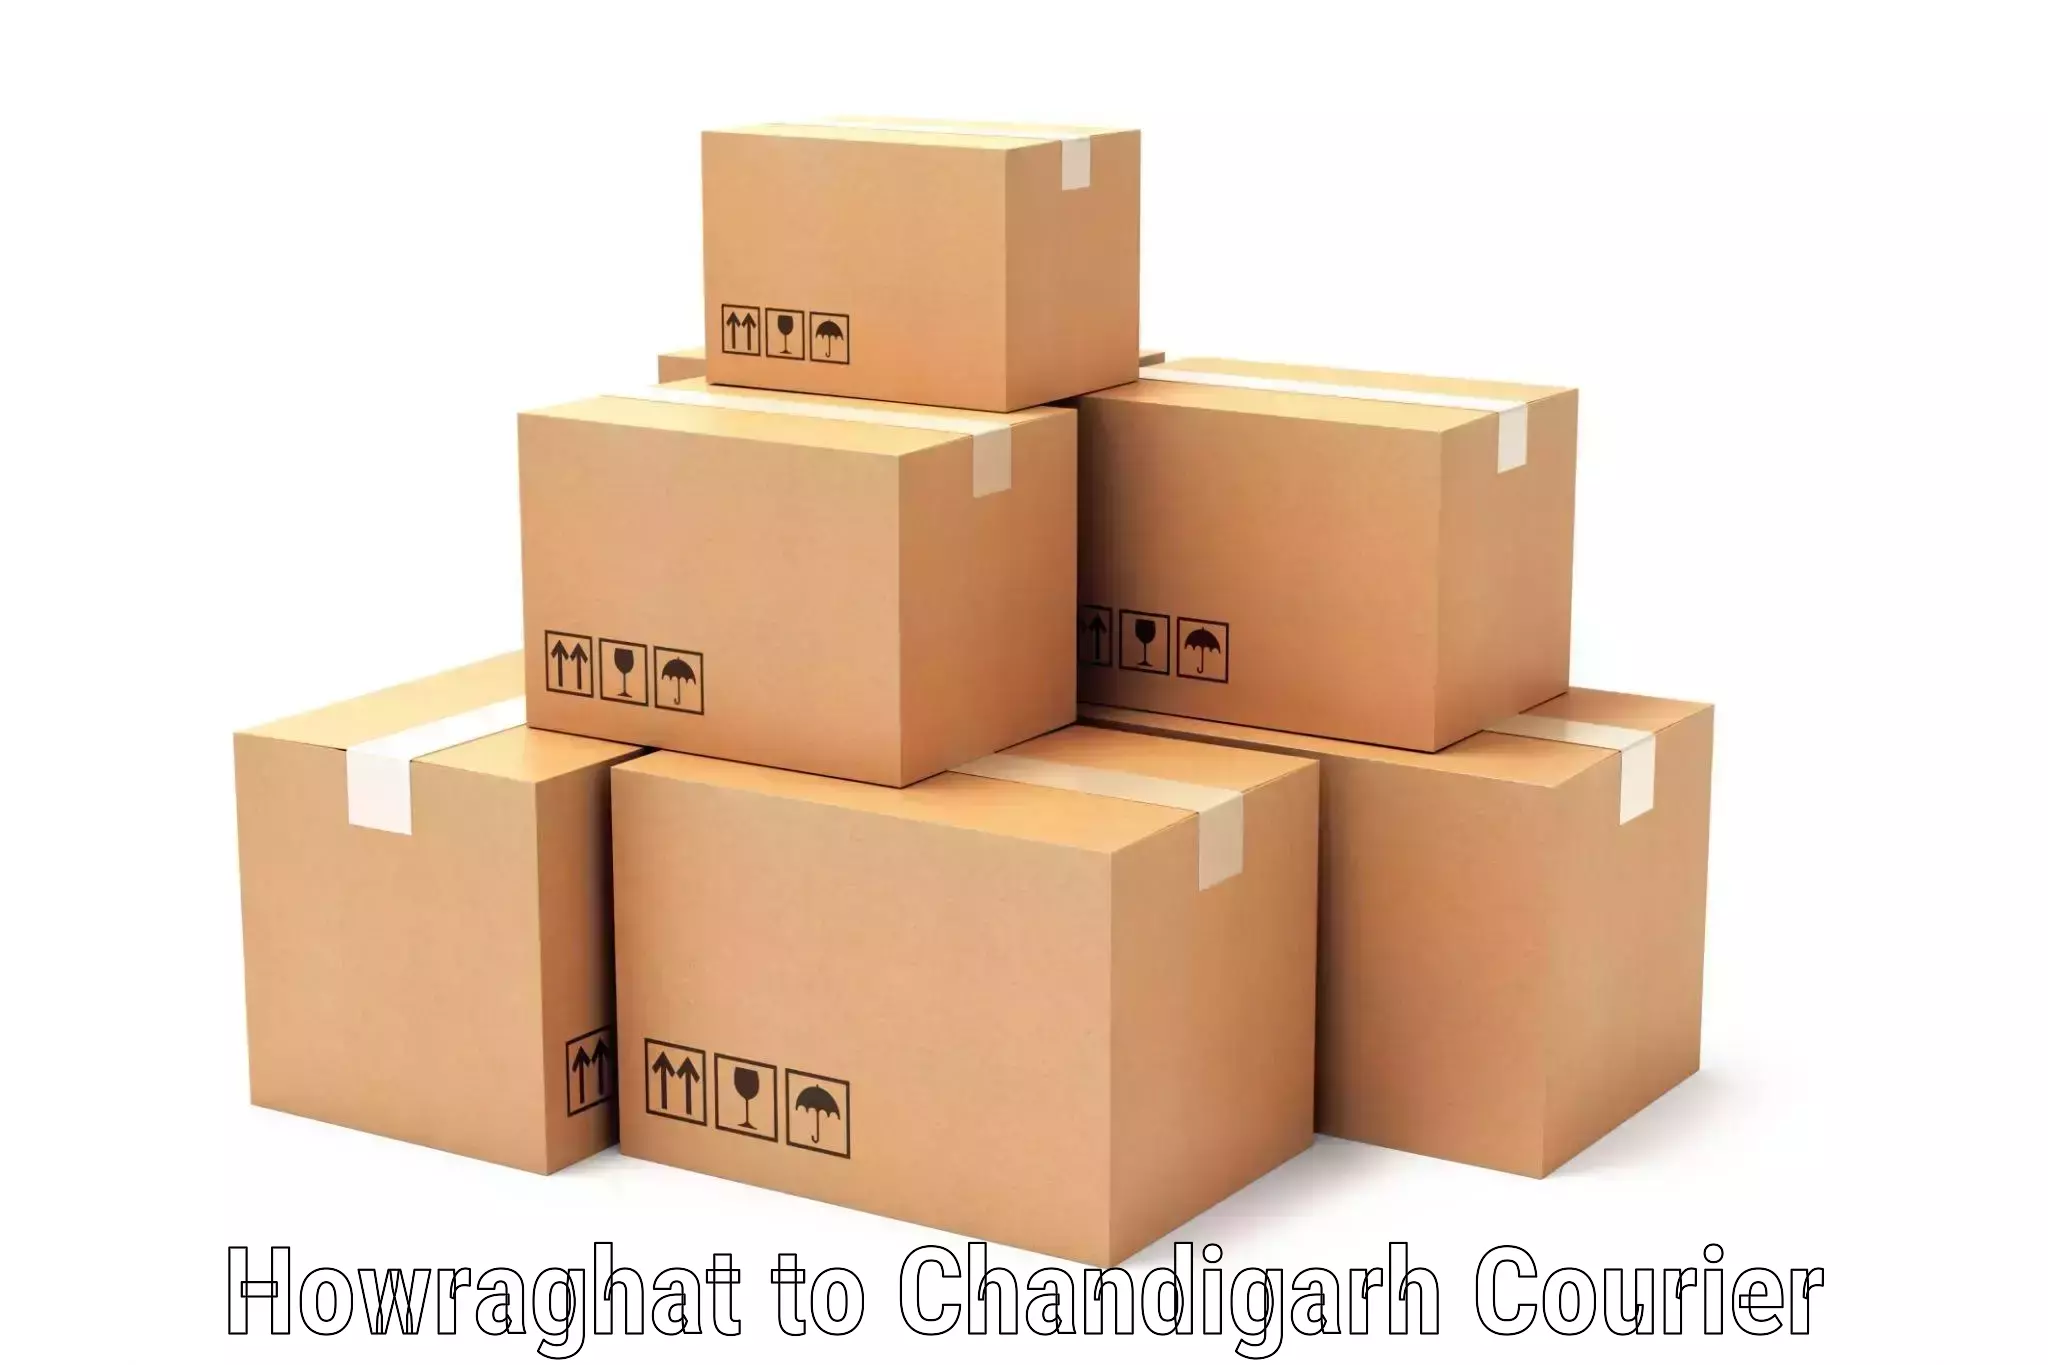 Secure package delivery Howraghat to Chandigarh